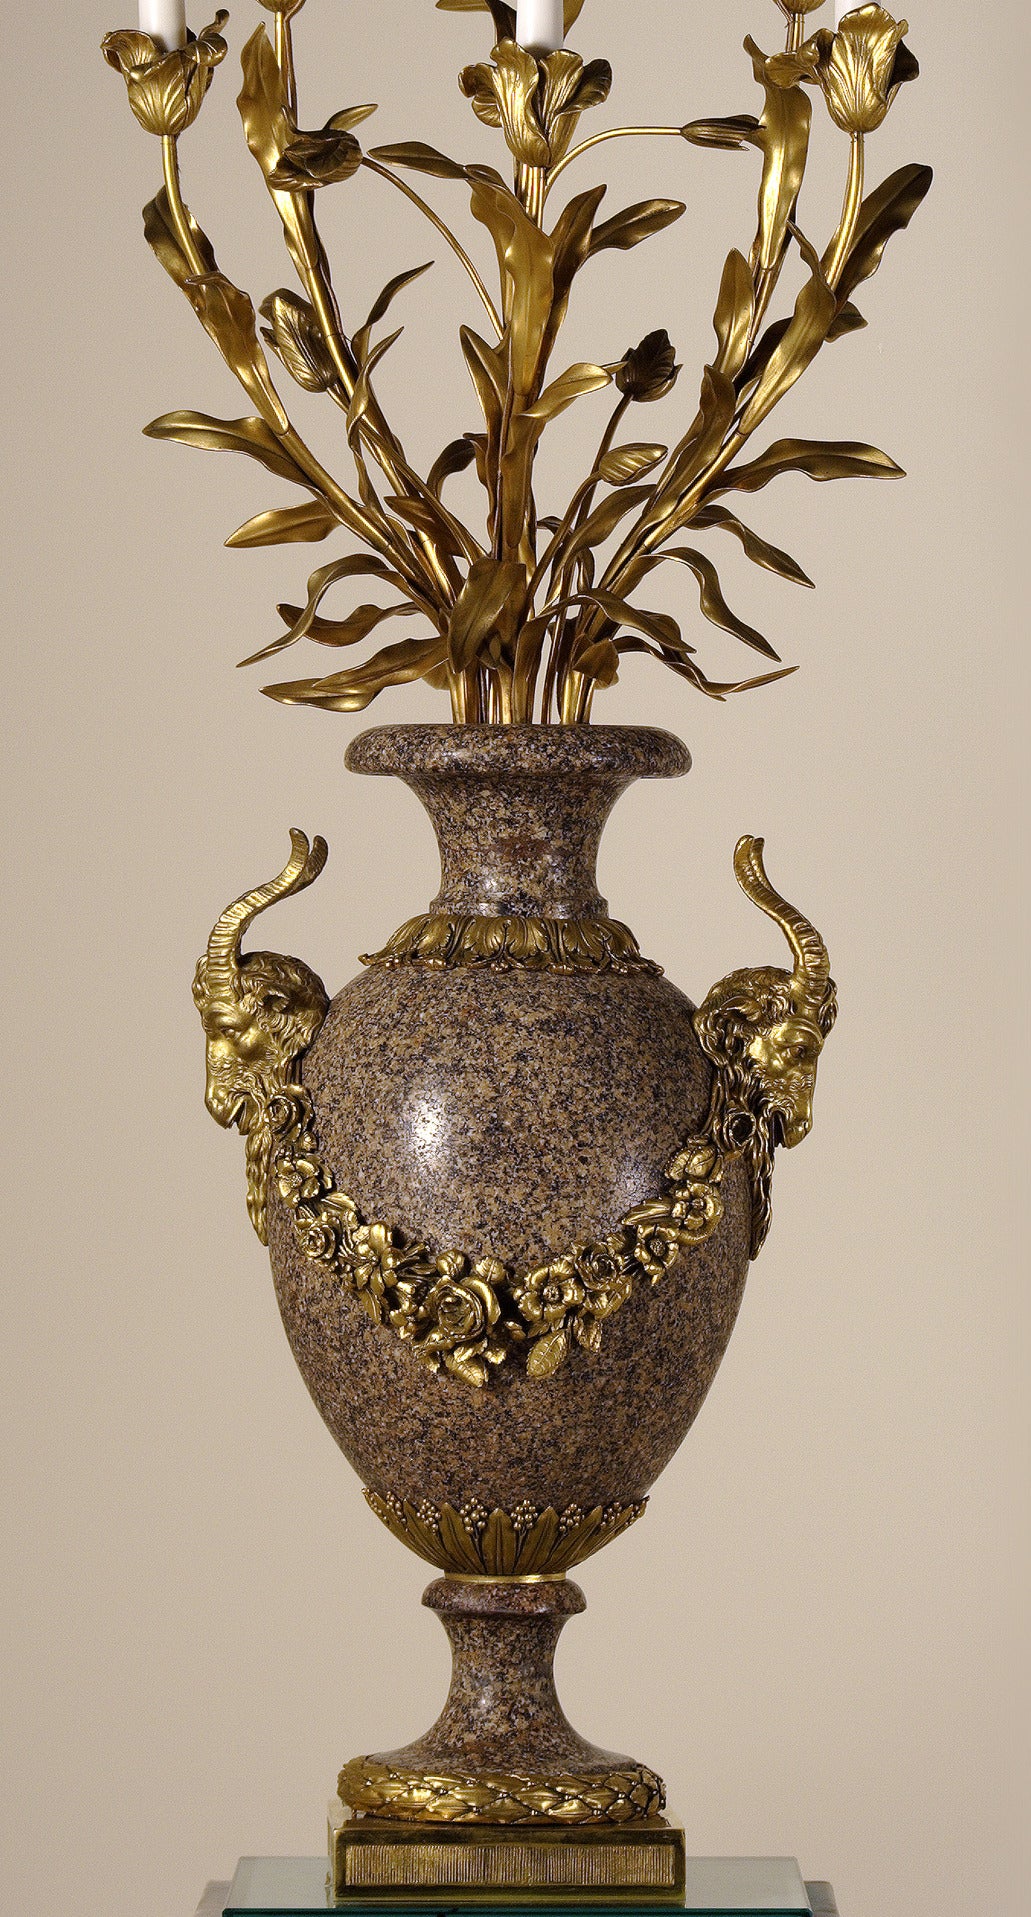 Beautiful granite and ormolu pair of candelabra vases. Six light arms imitating a floral composition emerging from the vases. Granite vases ornamented with ram heads joined by a flower garland. Resting on a circular base adorned with an ormolu